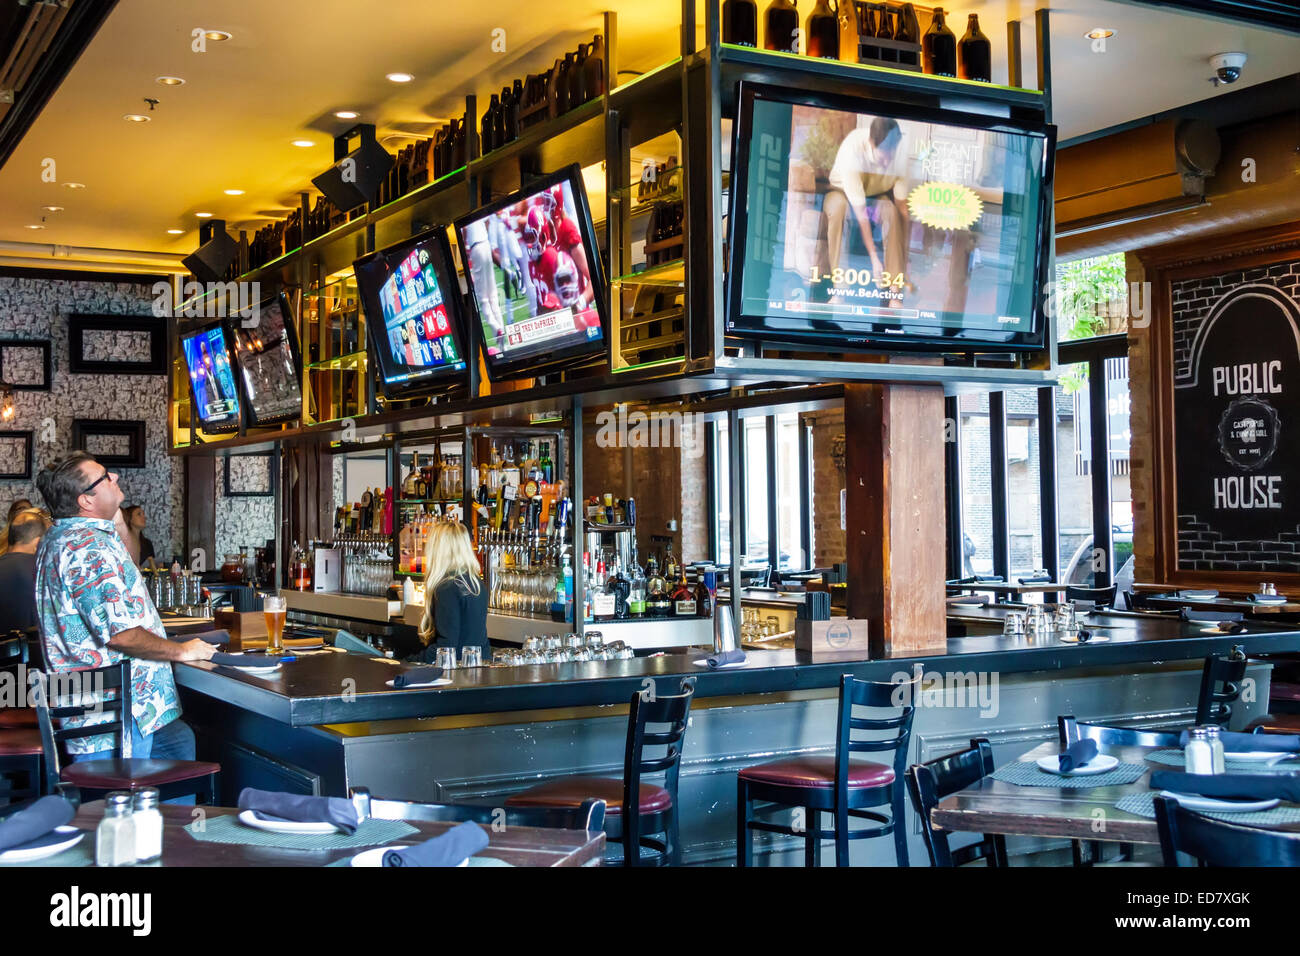 Chicago Illinois,River North,downtown,North State Street,Public House,restaurant restaurants food dining cafe cafes,interior inside,sports bar,big scr Stock Photo